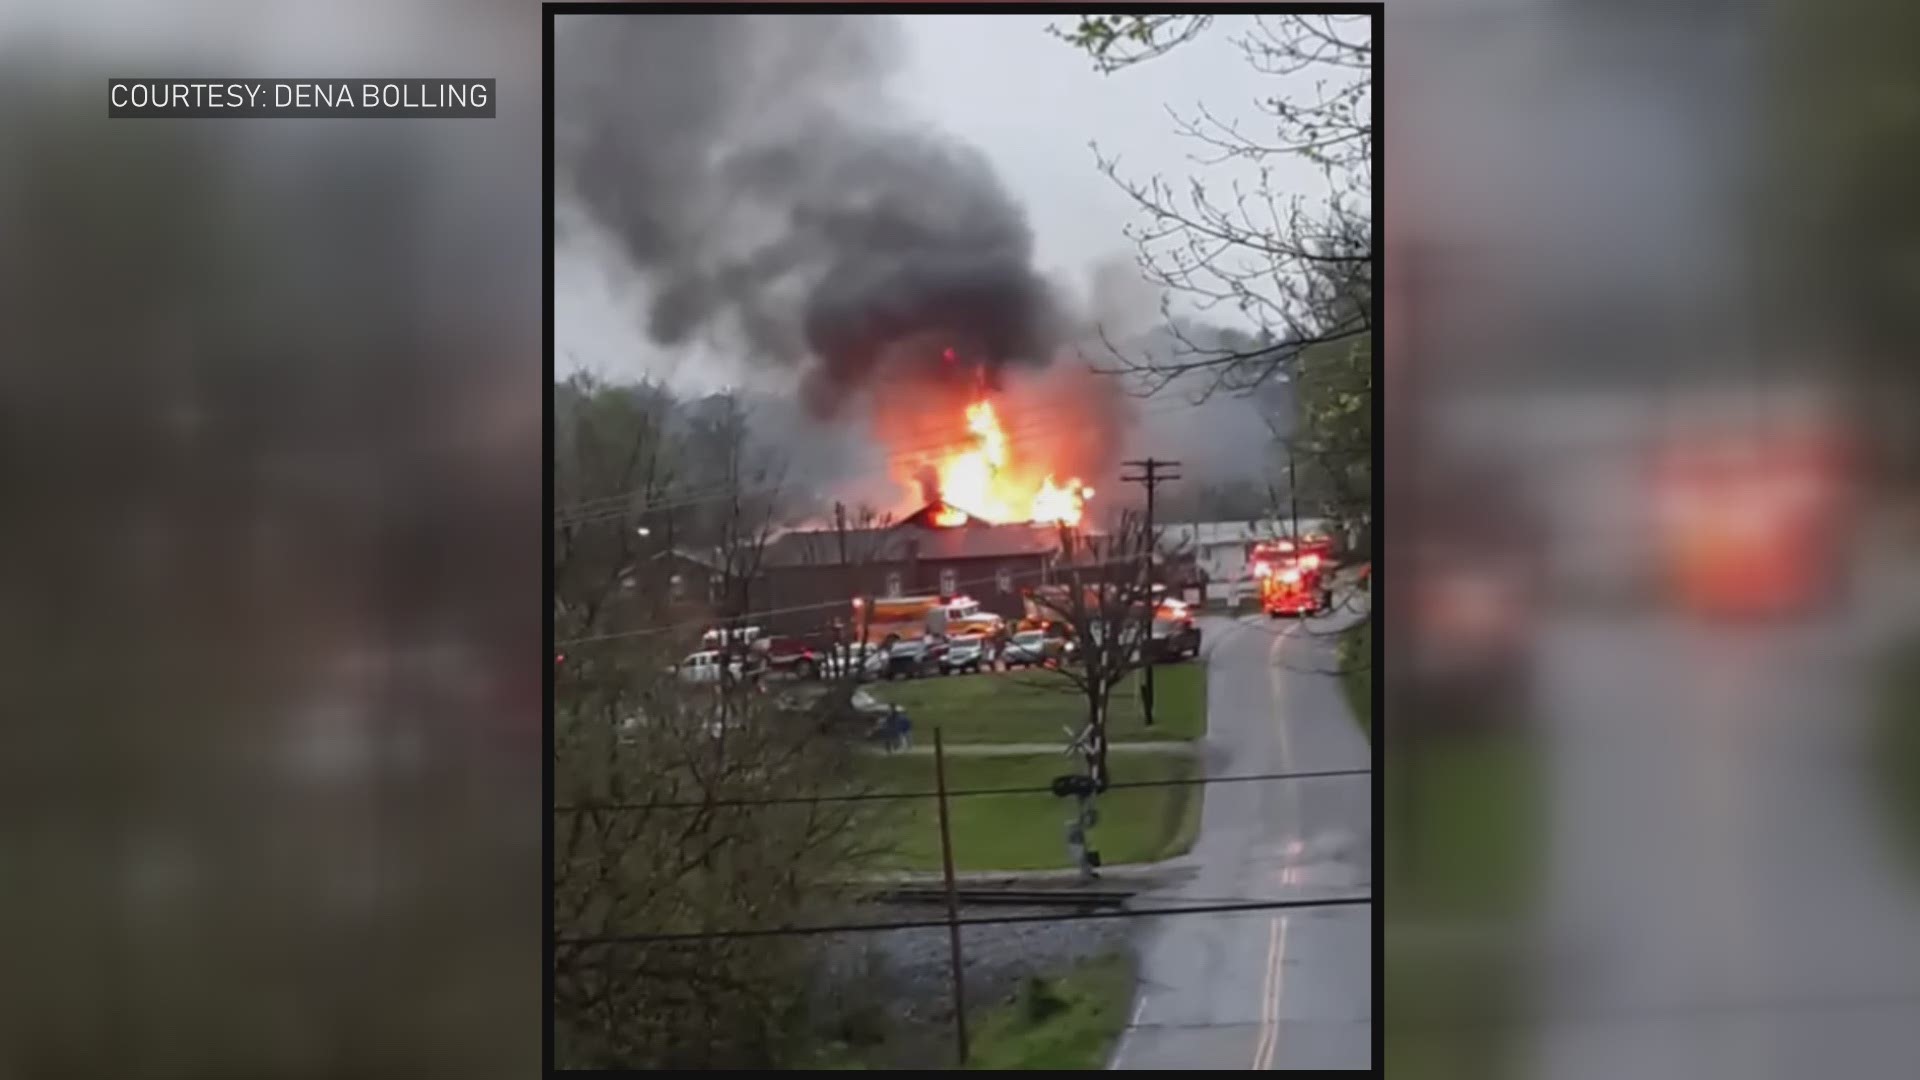 The fire was reported around 7 a.m. on Sunday, right as severe weather was moving through Hamblen County.